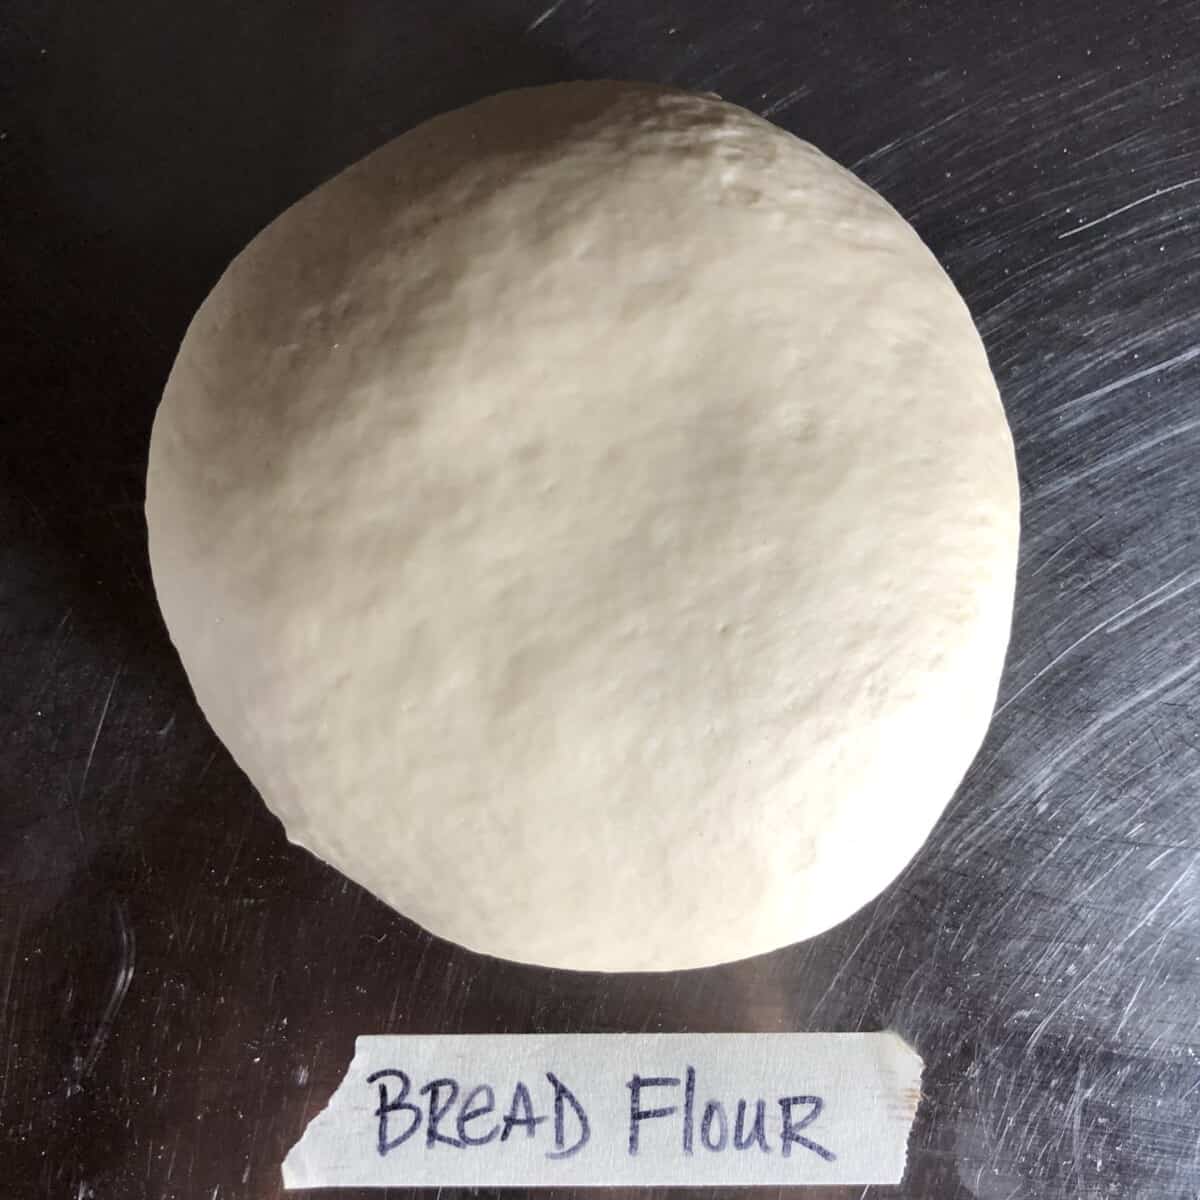 A smooth and well-kneaded dough ball.